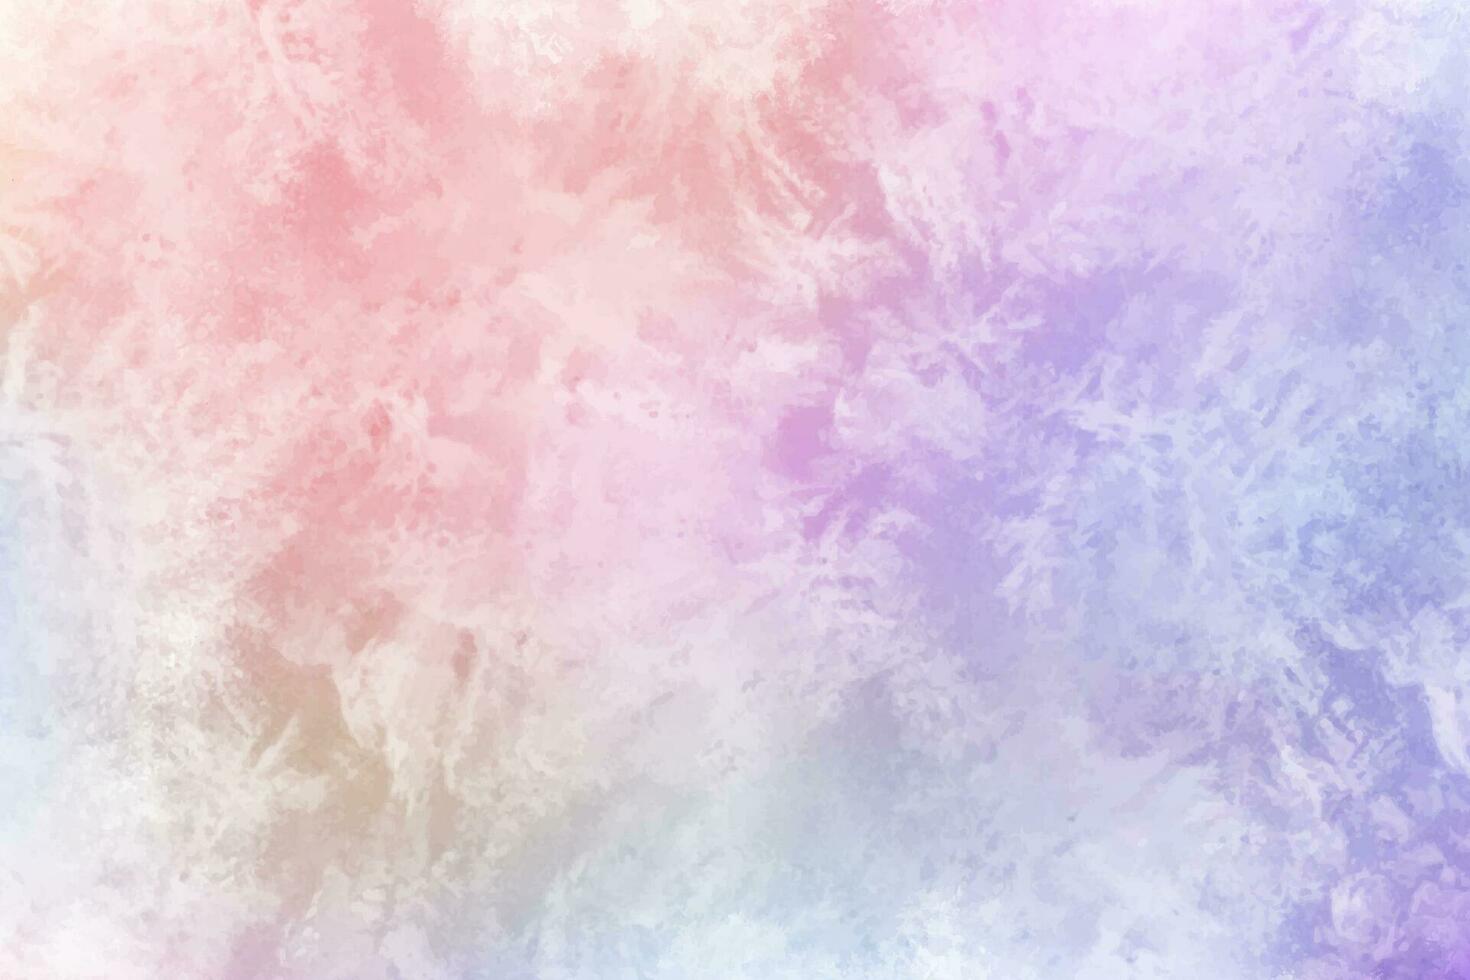 Abstract pastel watercolor background. Rainbow watercolour pattern vector